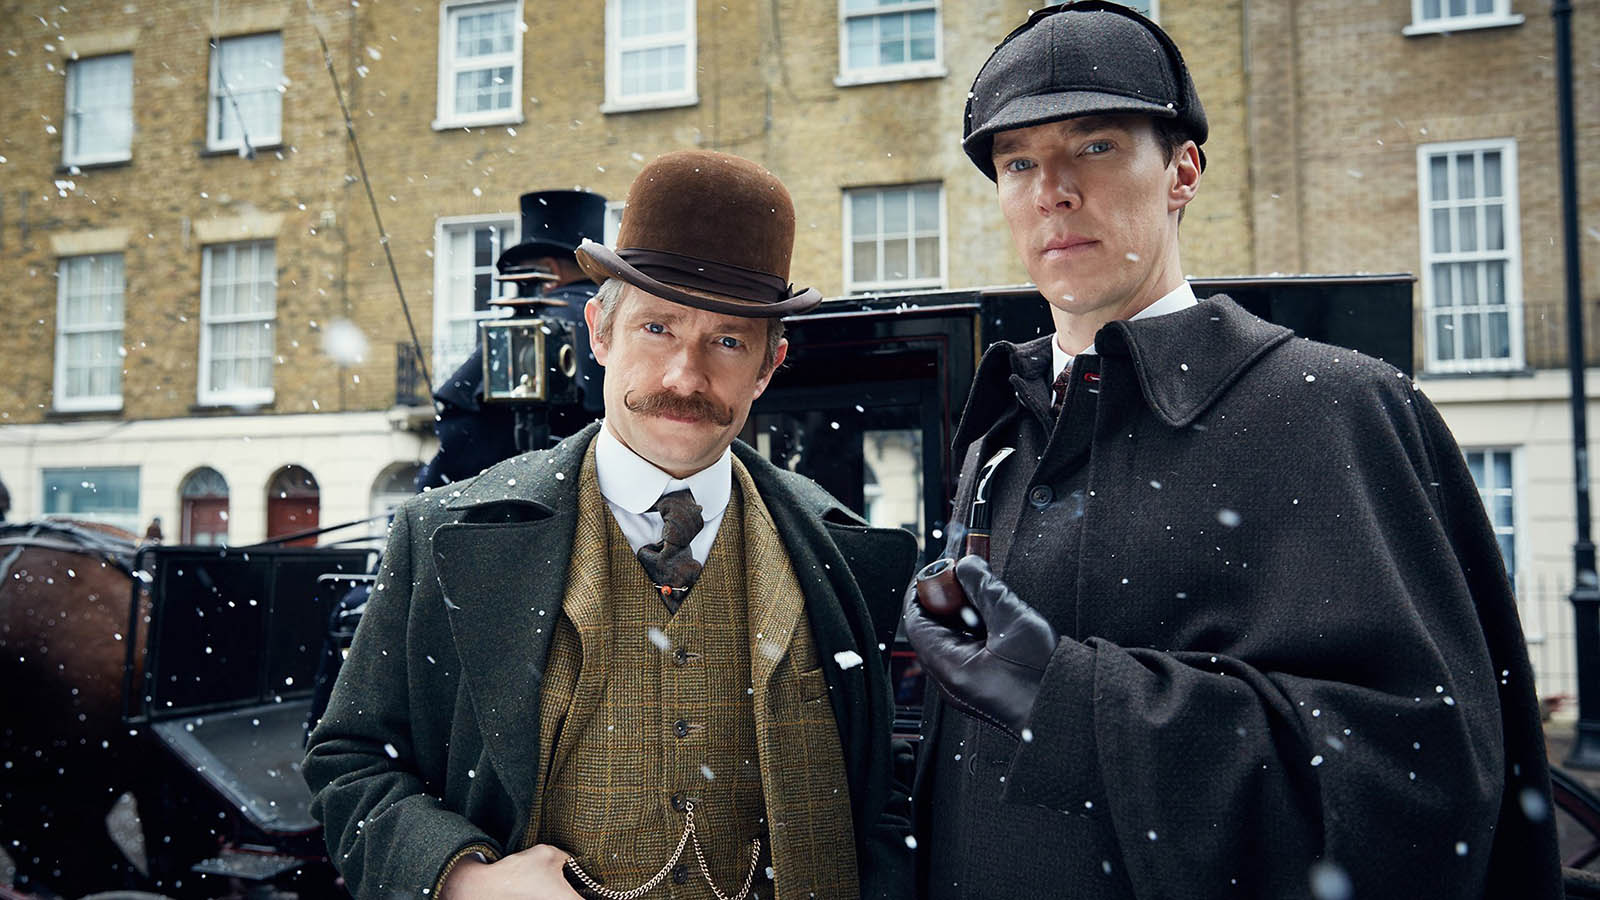 All Answers to This Trivia Quiz Are Numbers – Can You Get at Least 15/20? Sherlock Holmes and Dr. Watson